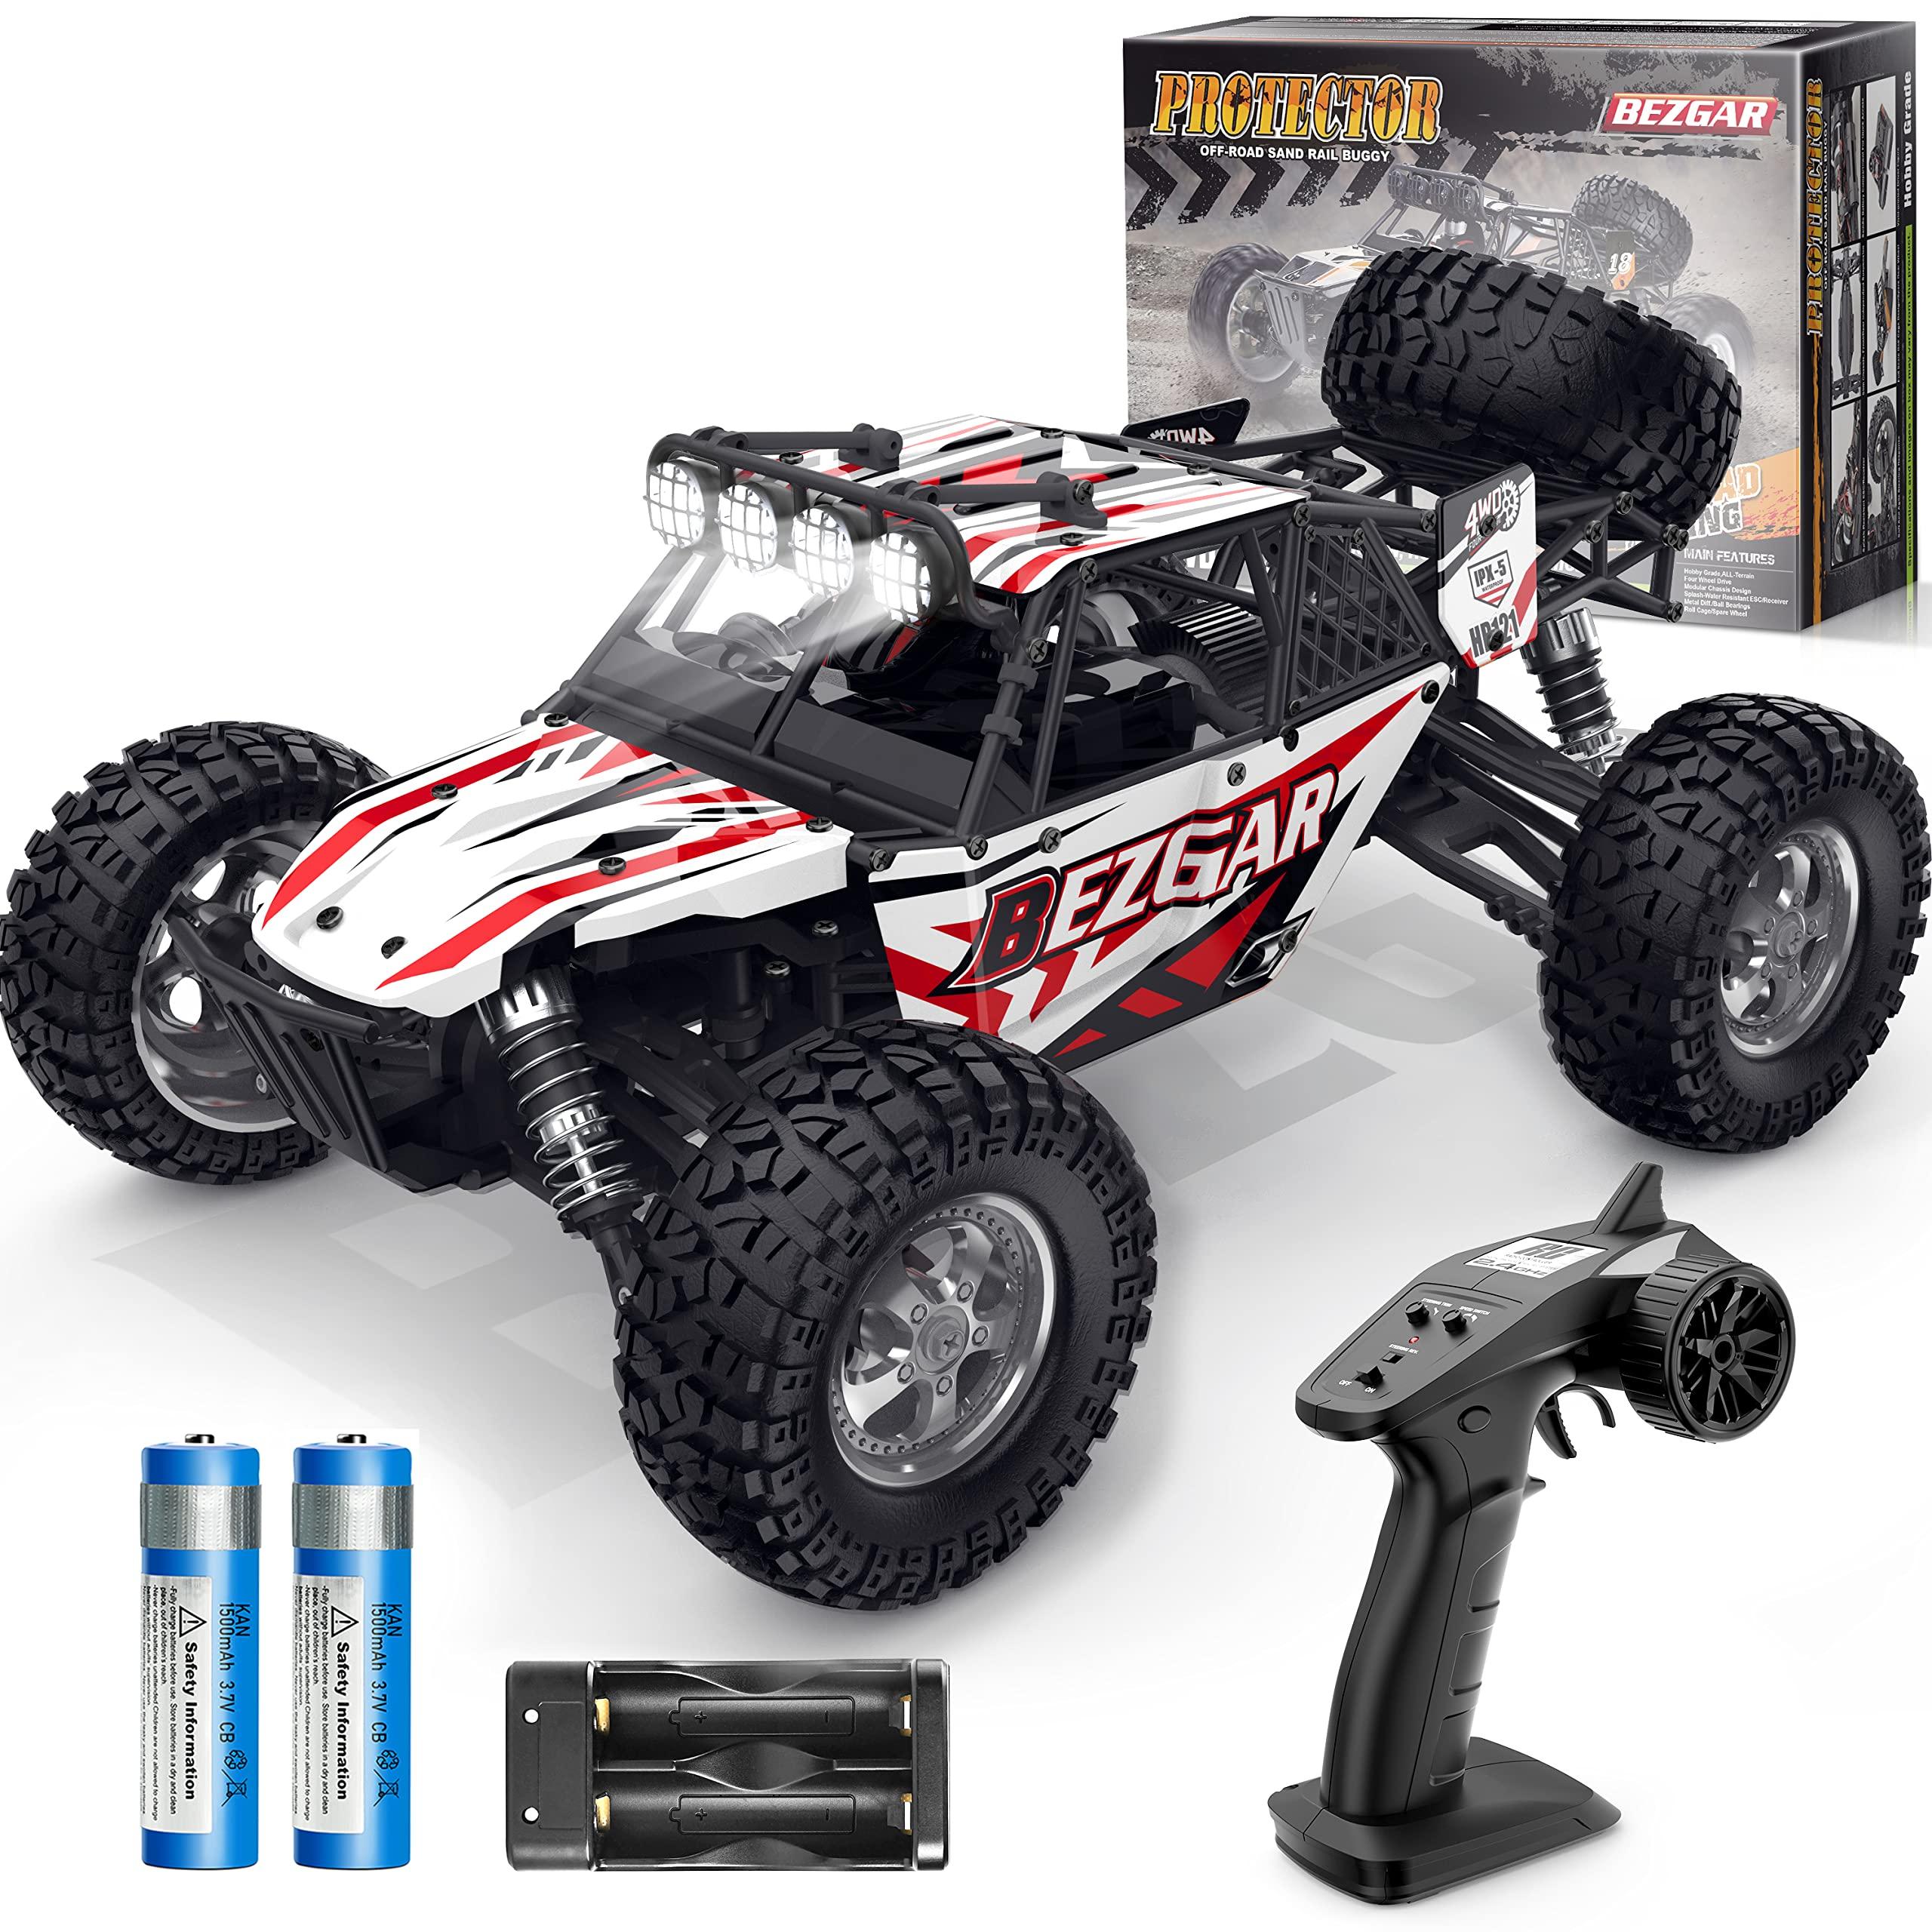 Rc Buggy 4Wd: Materials and Designs: A Guide to the RC Buggy 4WD